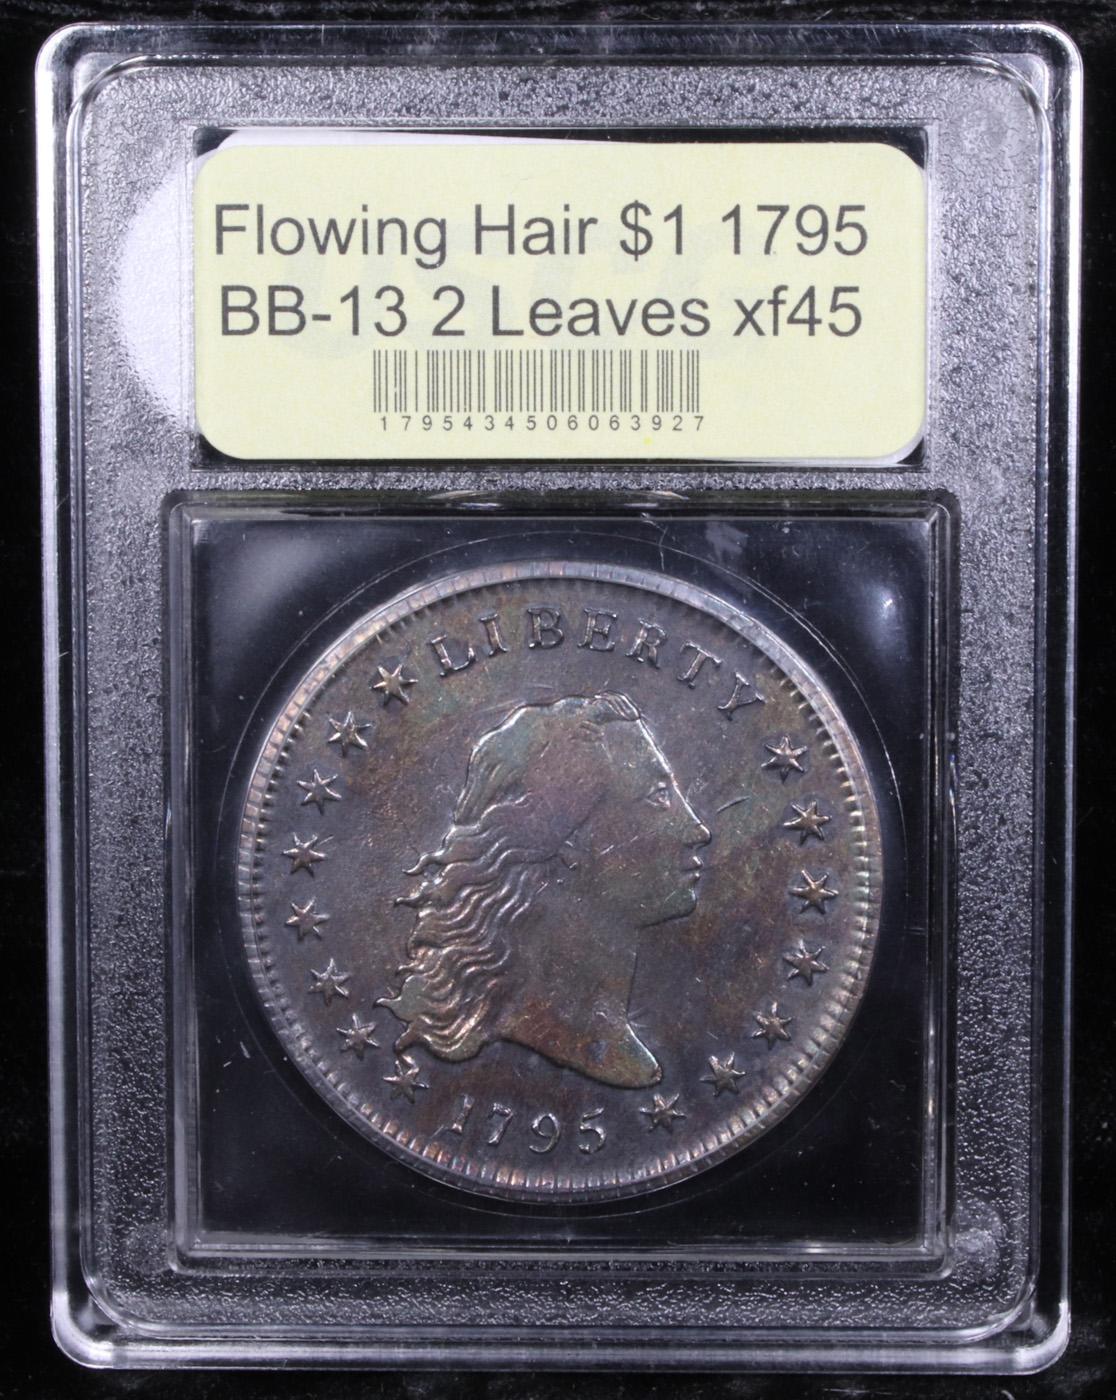 ***Auction Highlight*** 1795 Flowing Hair BB-13 2 Leaves Flowing Hair Dollar 1 Graded xf+ BY USCG (f